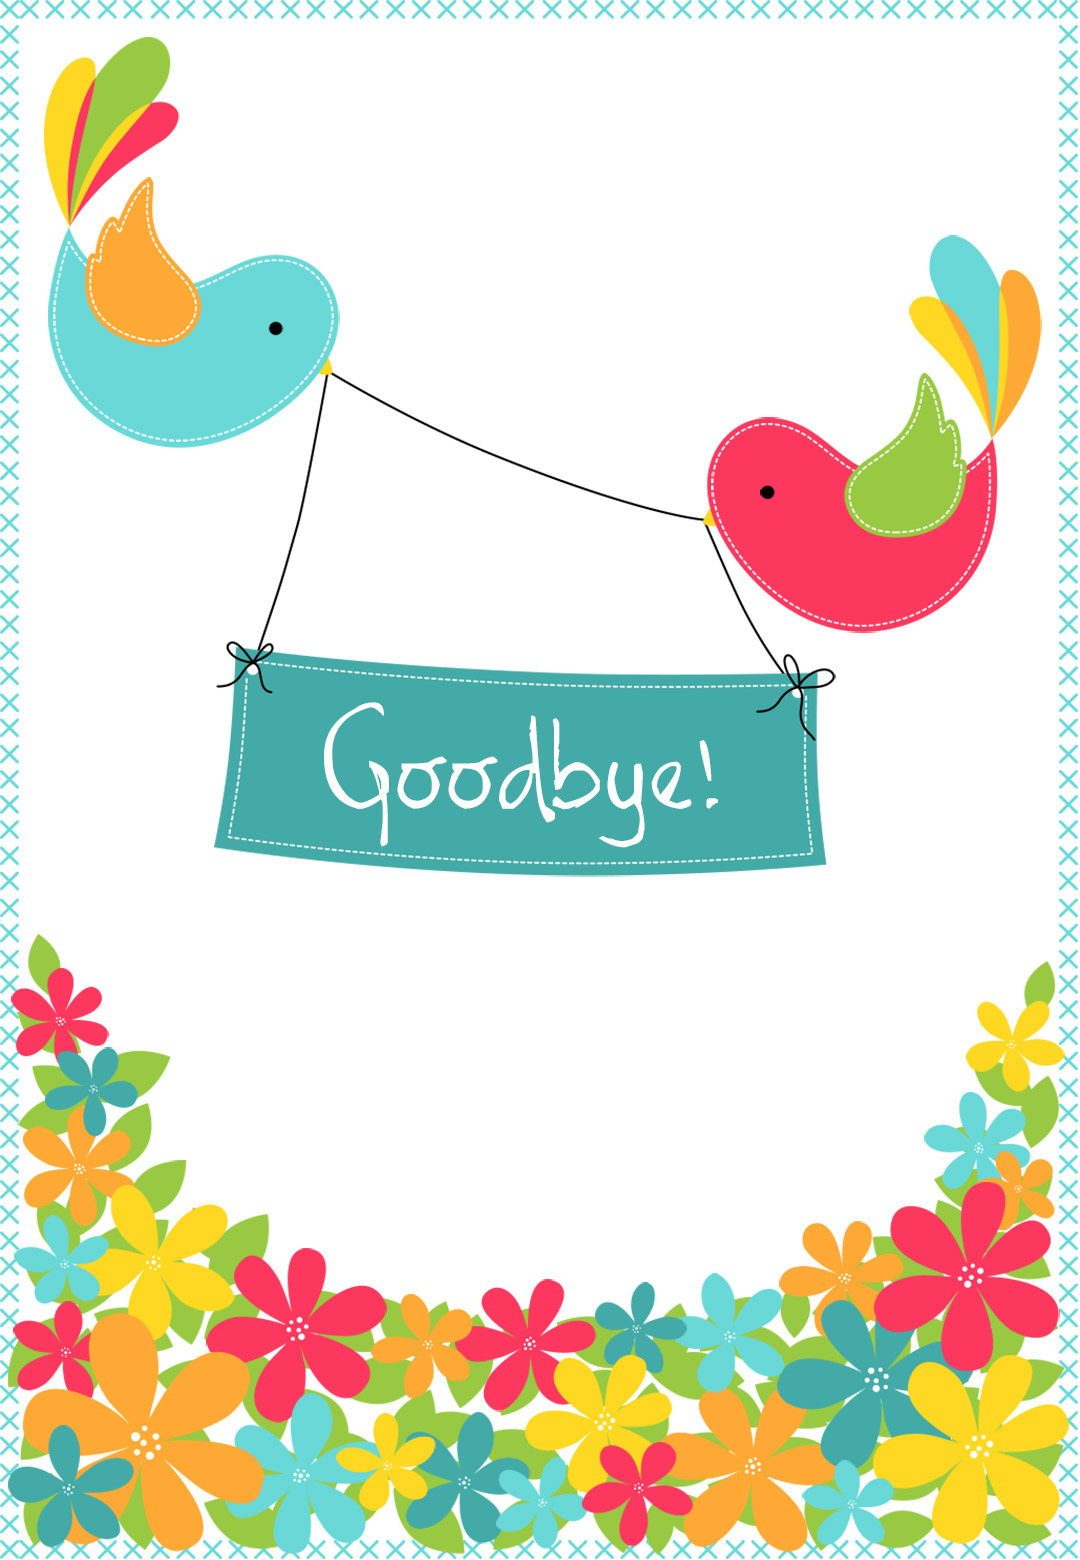 Goodbye From Your Colleagues - Free Good Luck Card | Greetings Island - Free Printable Goodbye Cards